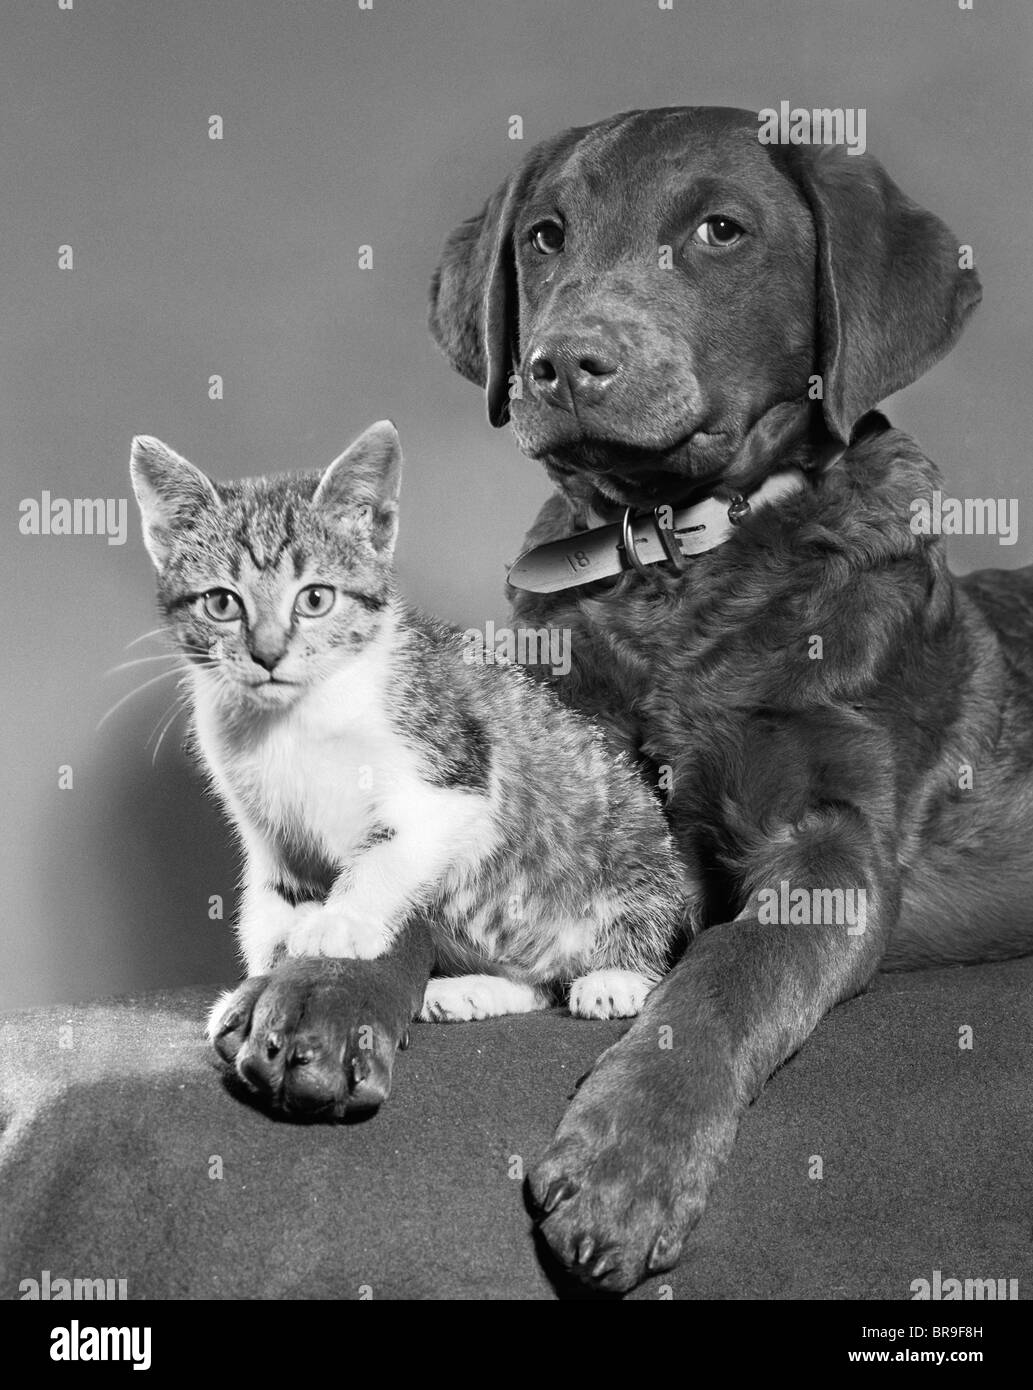 1950s PORTRAIT OF LAB MIX DOG LYING DOWN WITH KITTEN SITTING ON PAW Stock Photo